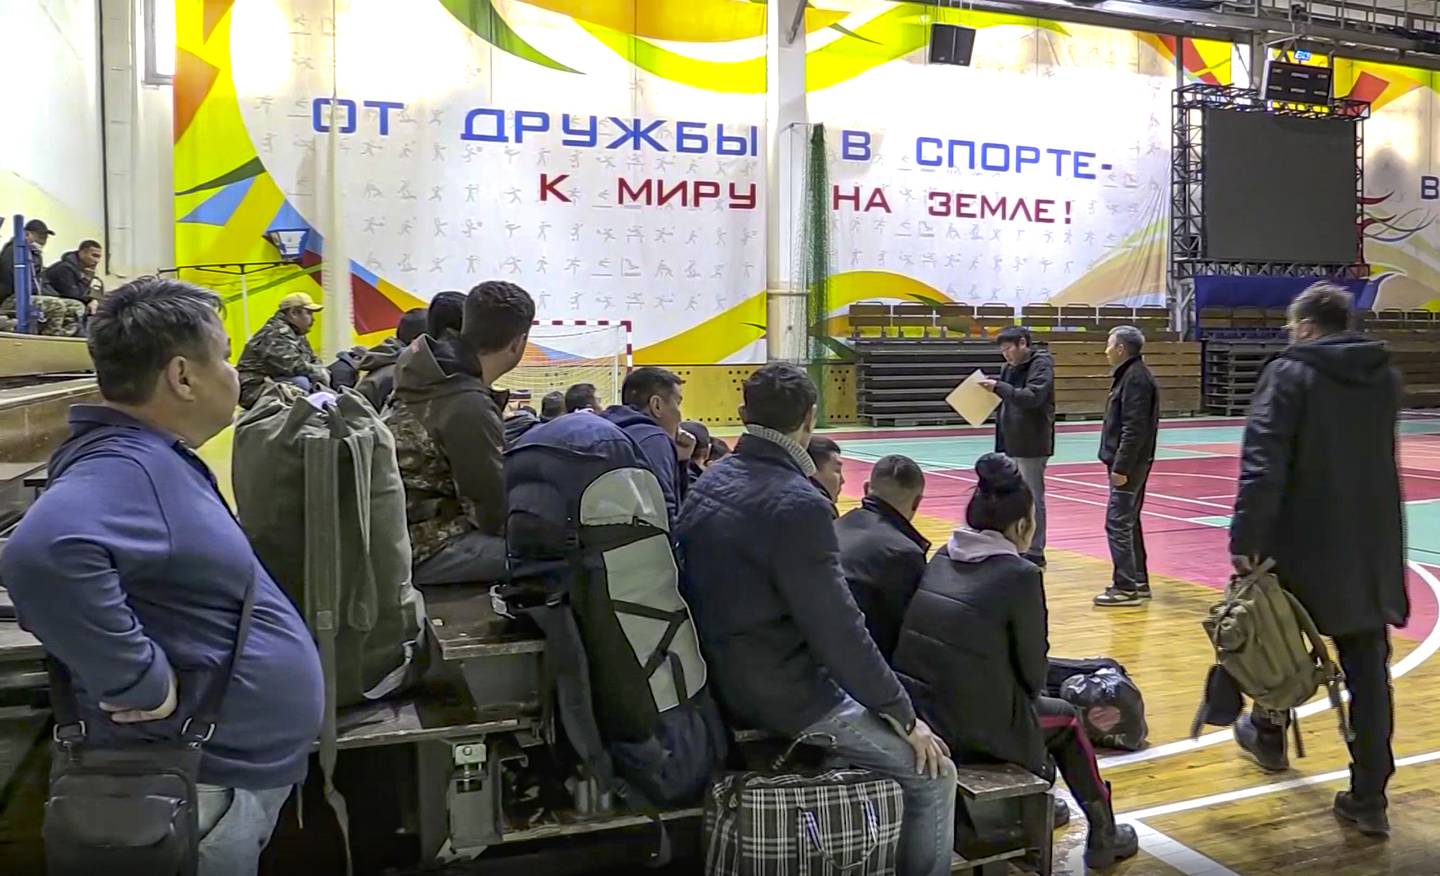 In this image taken from video, Russian draftees gather inside an indoor stadium turned into collection center for the draftees, who will be sent to the military units of the Eastern Military District, in Yakutsk, Russia, Friday, Sept. 23, 2022. Mobilization is underway in Russia's Far Eastern region of Yakutia after President Vladimir Putin ordered a partial mobilization of reservists Wednesday to bolster his forces in Ukraine. The words in the background read "From friendship in sports to peace on earth!". (AP Photo)